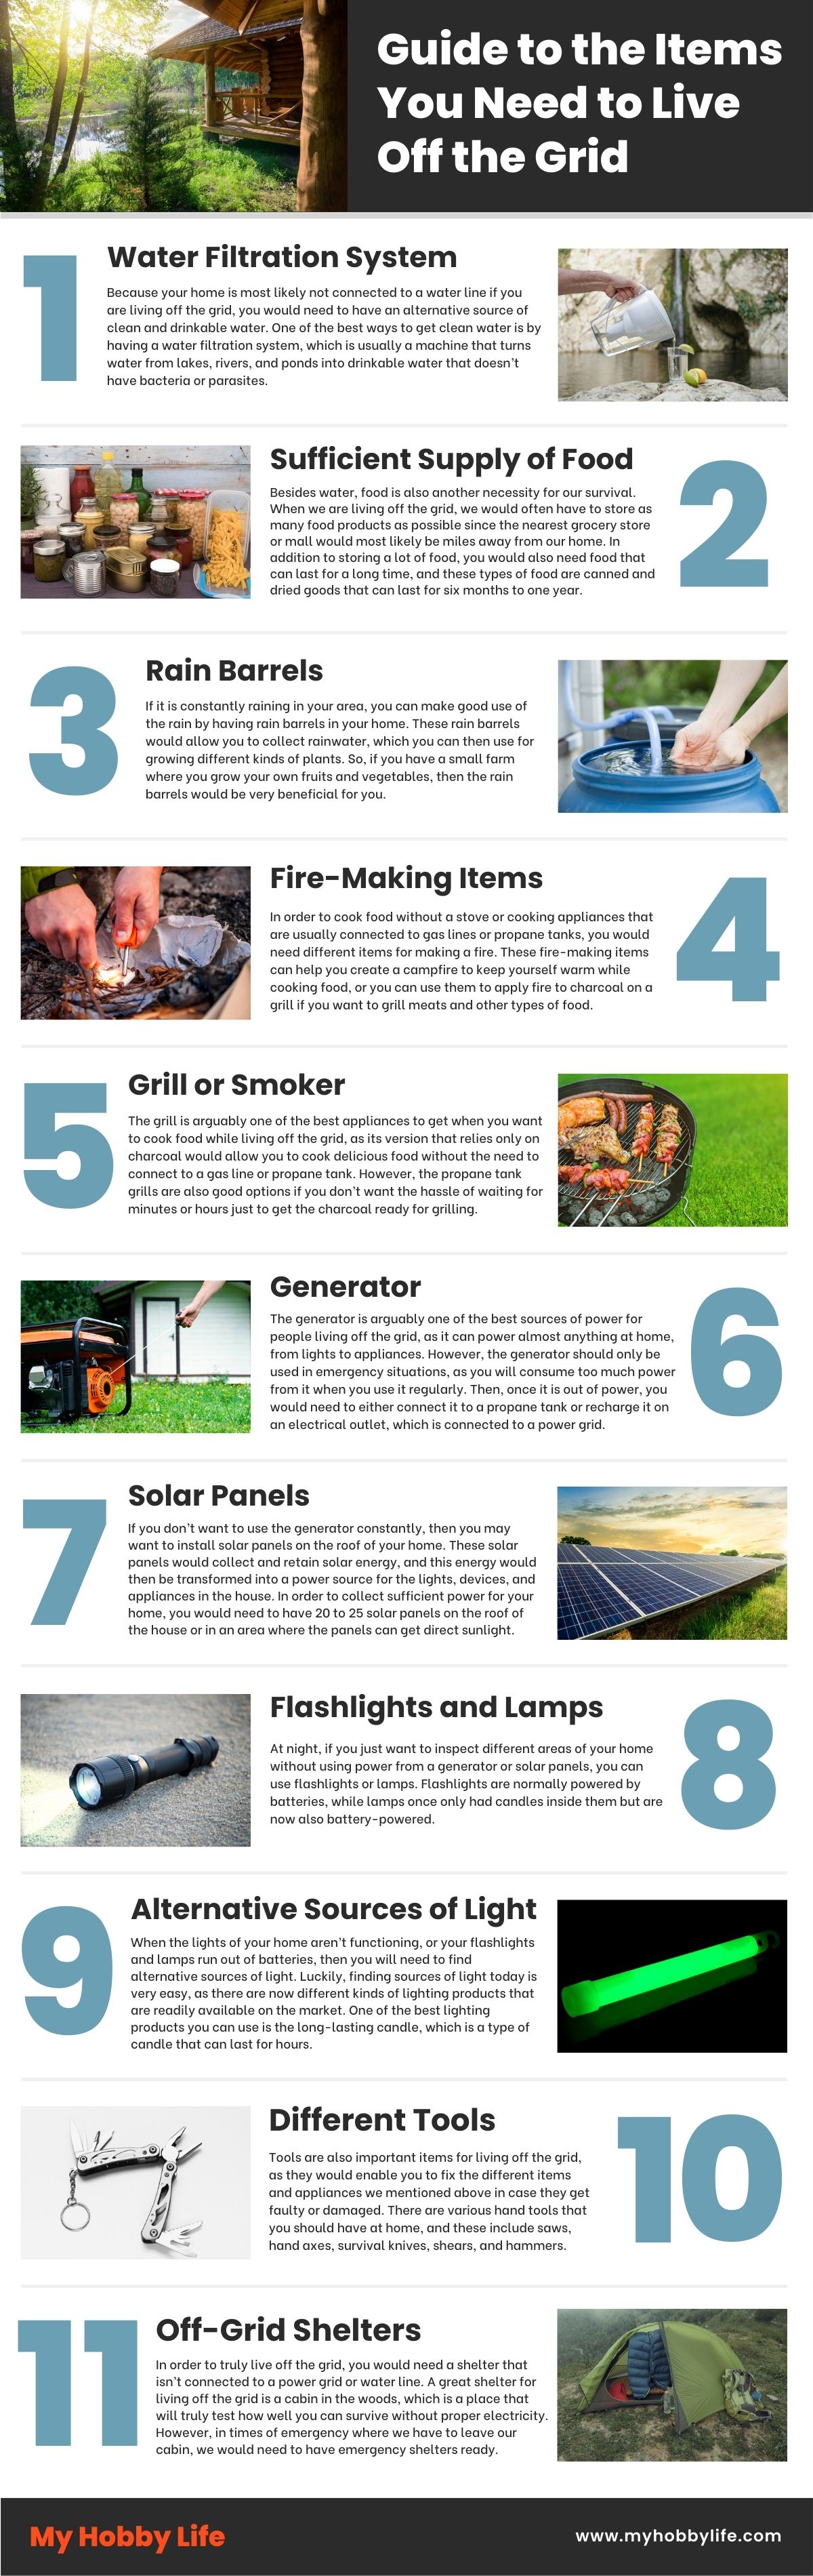 Guide to the Items You Need to Live Off the Grid Infographic